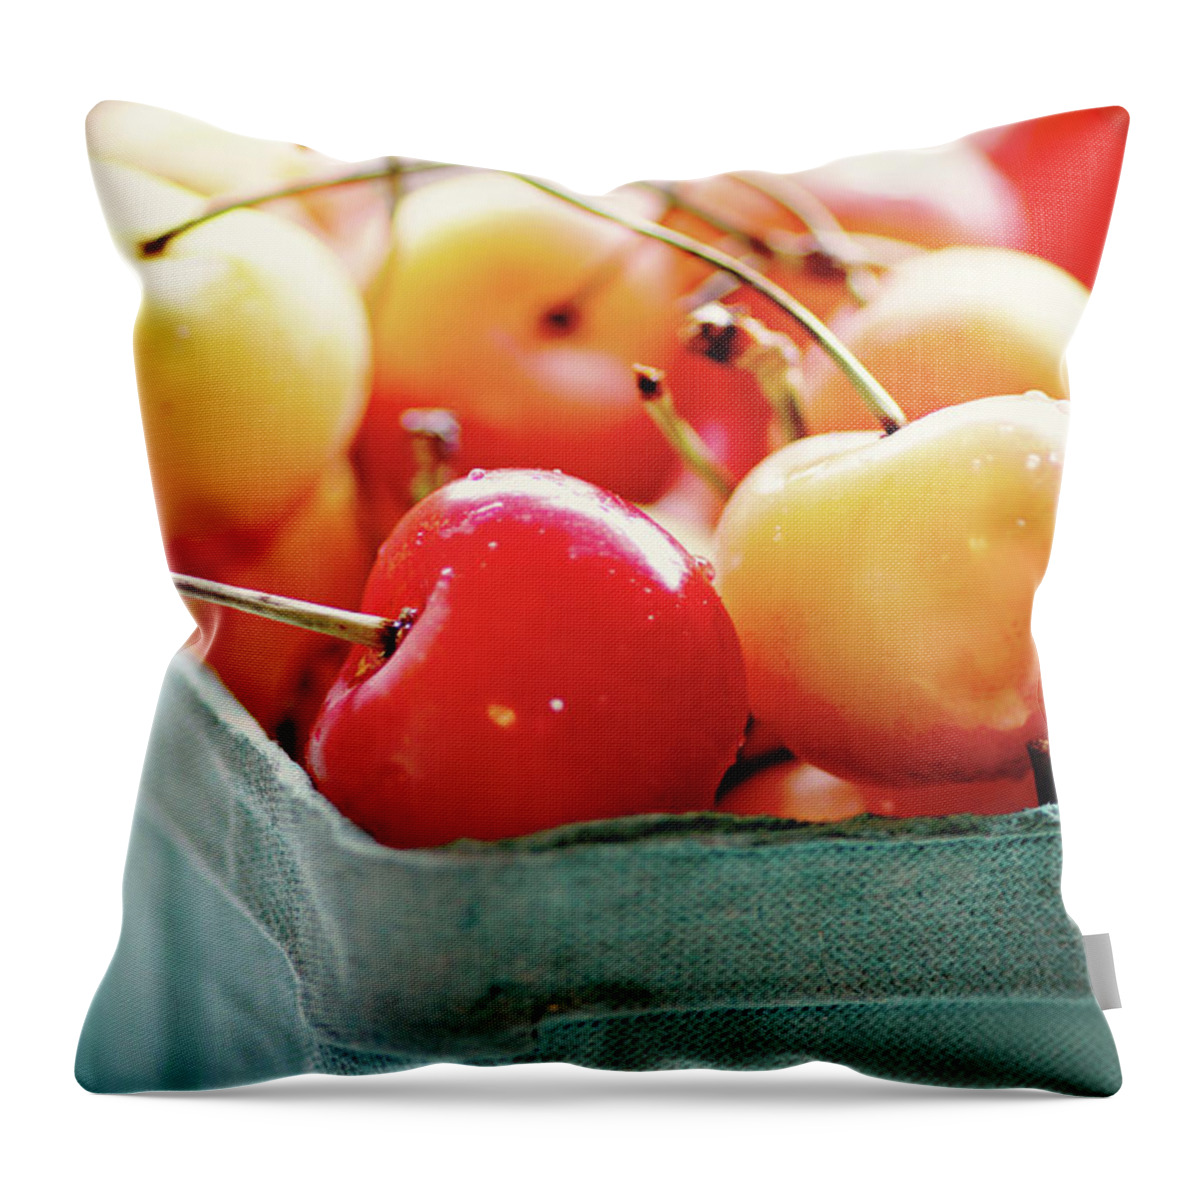 Cherry Throw Pillow featuring the photograph Sweet Treat by Amber Aiken Photography